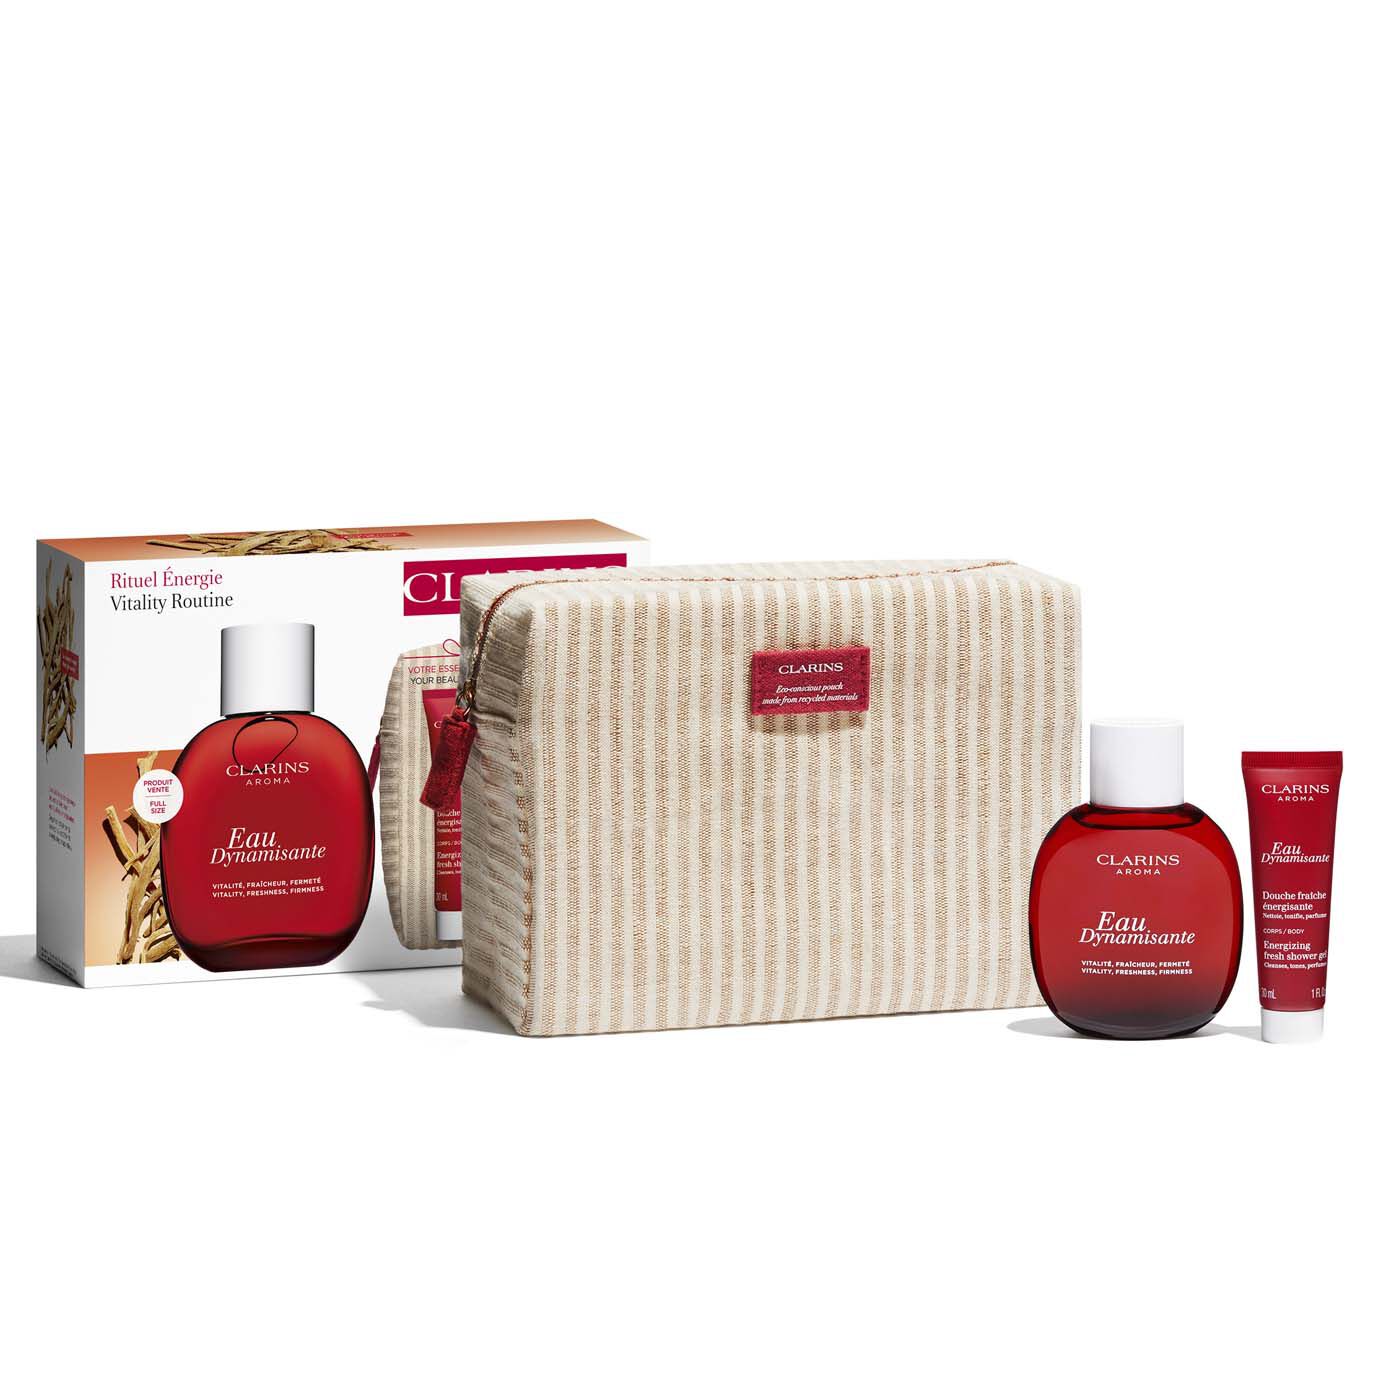 Limited Edition Make-Up Box | CLARINS®